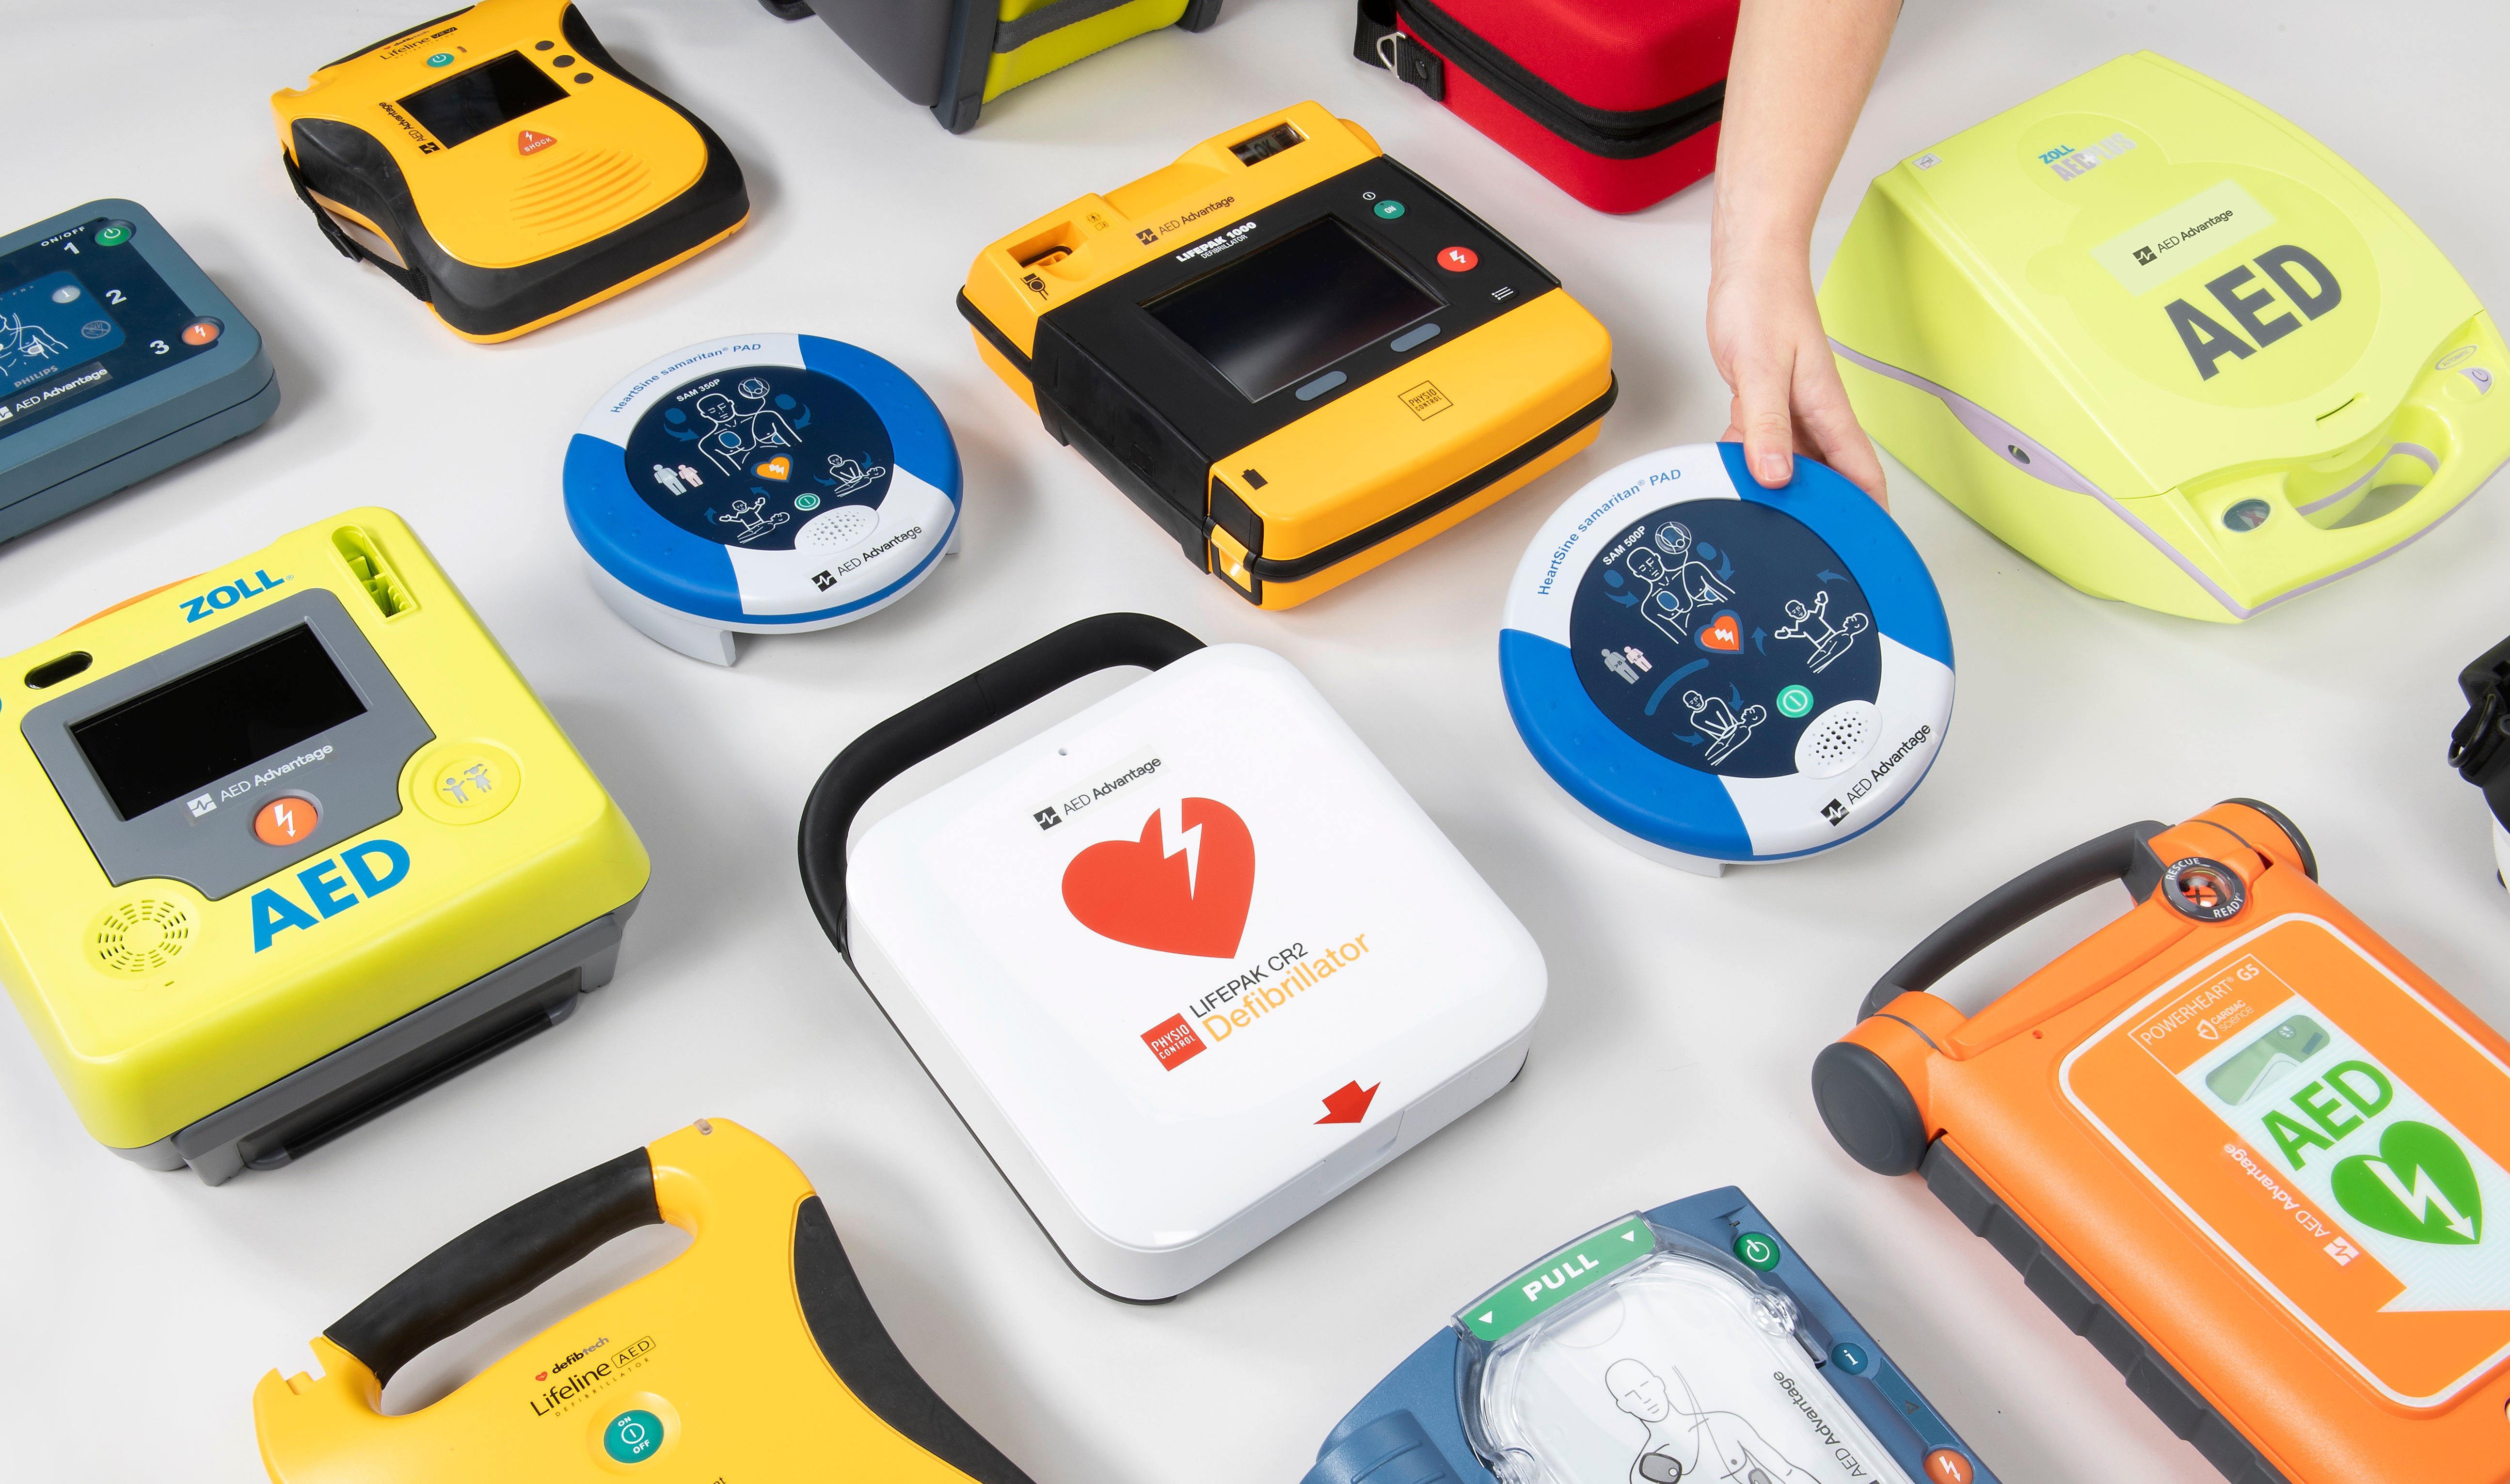 What Features Should I Look For In An AED?